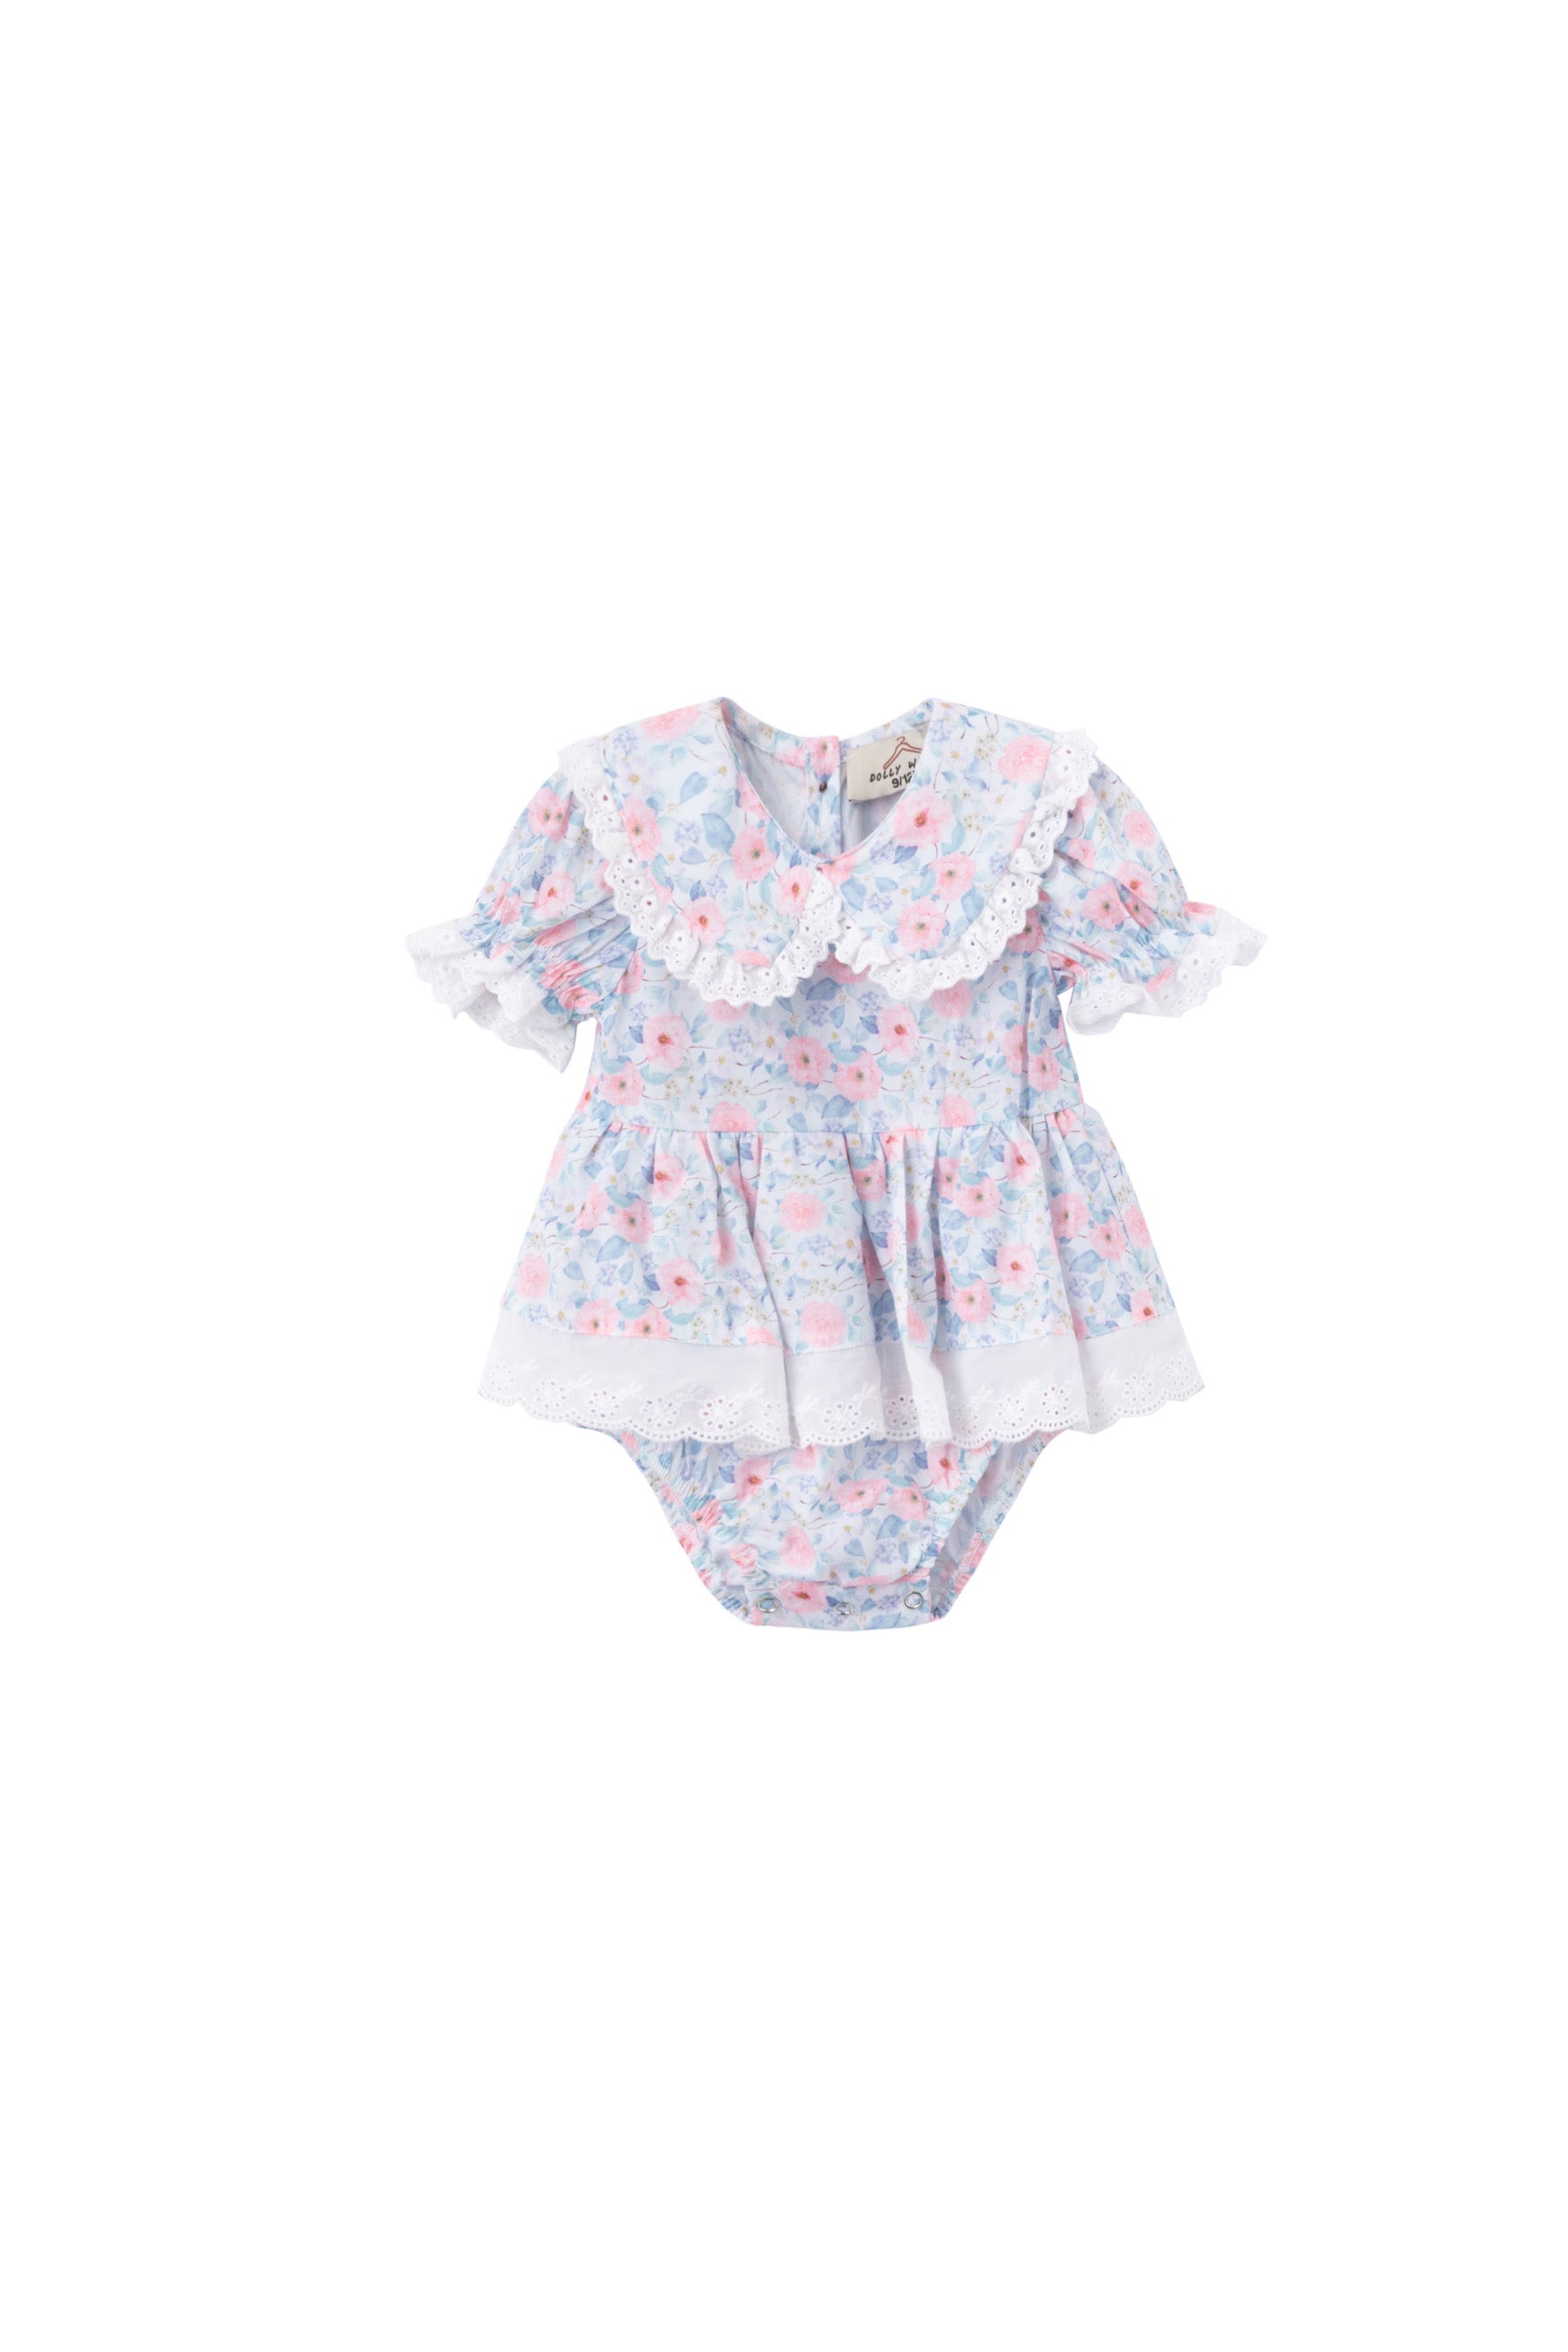 Frilly dolly romper